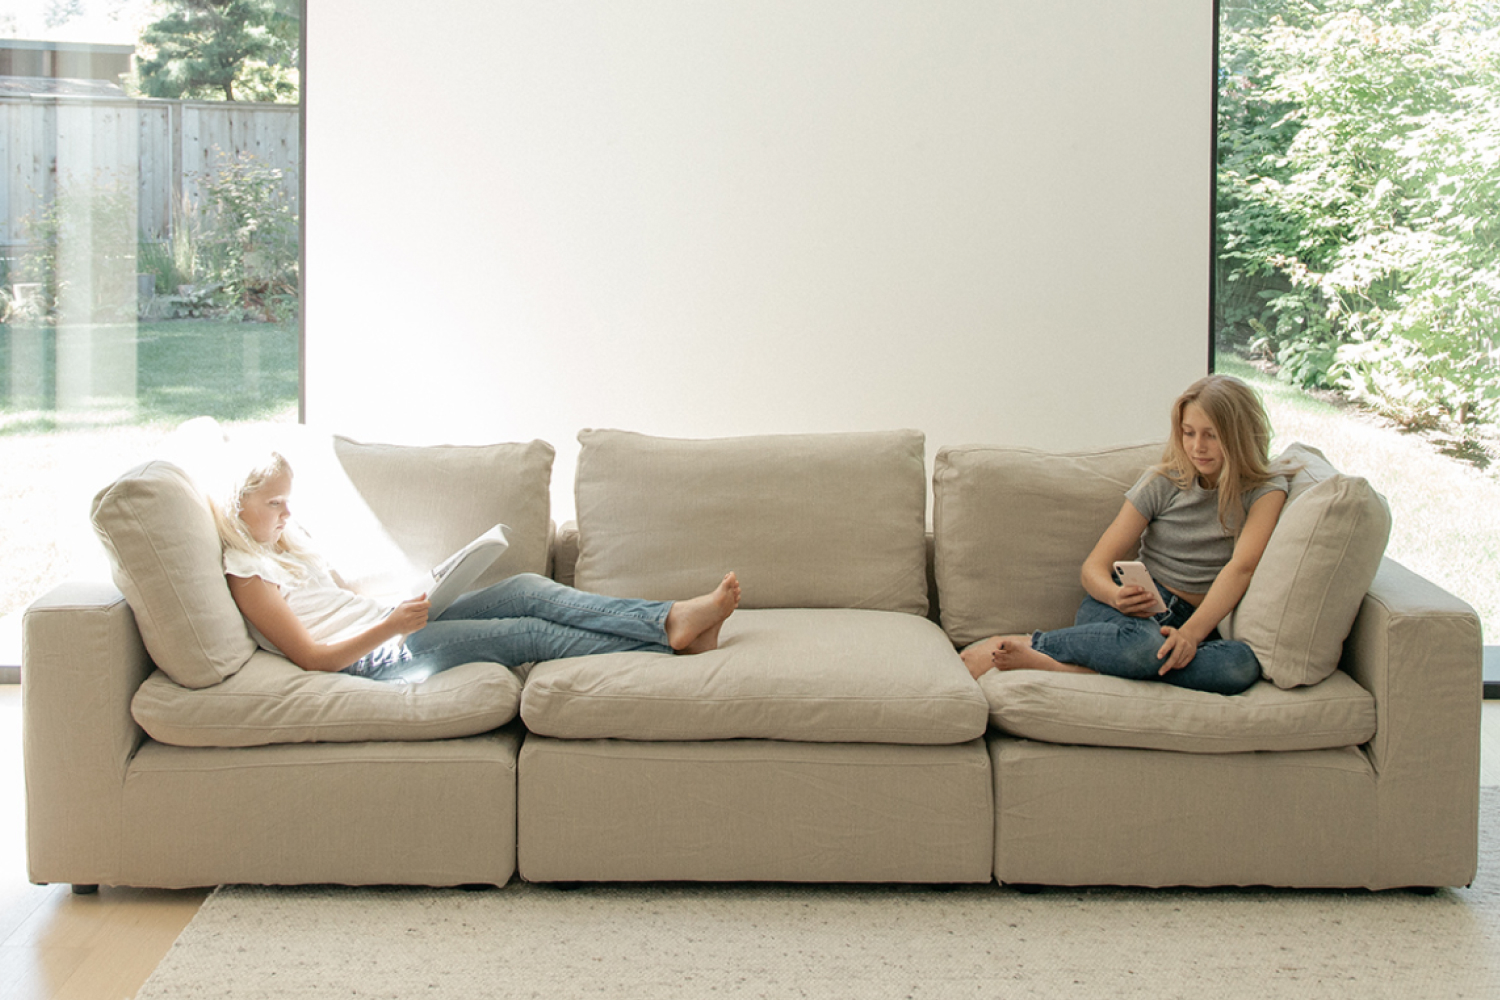 Two girls are comfortable lounging on an EM Cloud Sofa in a well-lit living room with a clear view of a green backyard through a floor-to-ceiling window.